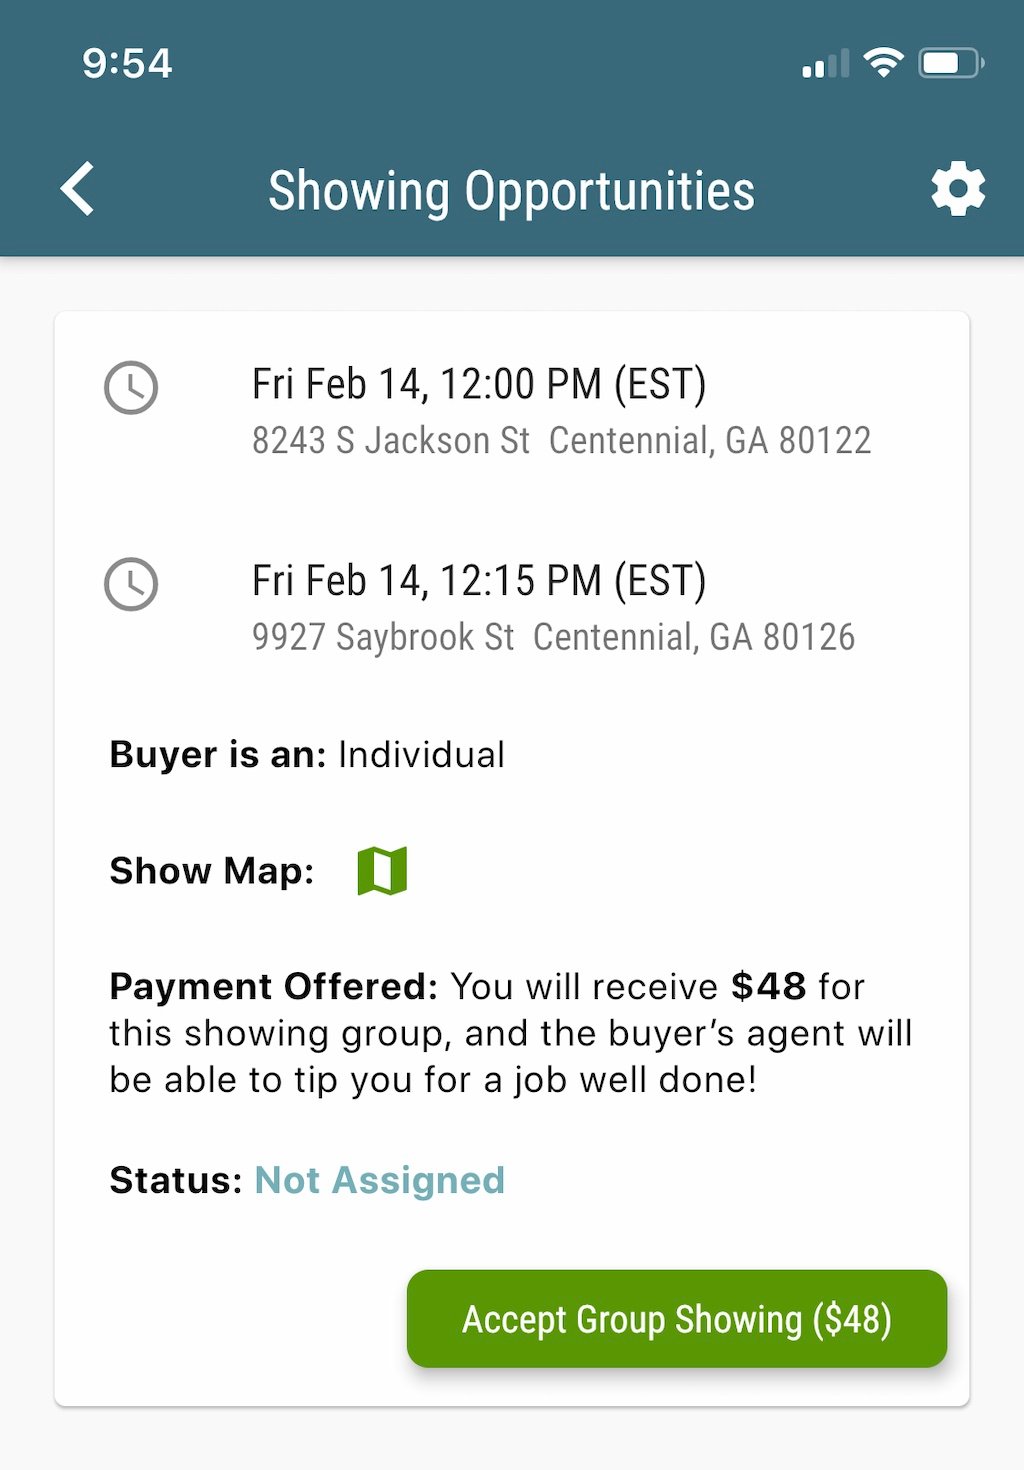 Showing agent opportunities page in Showami profile